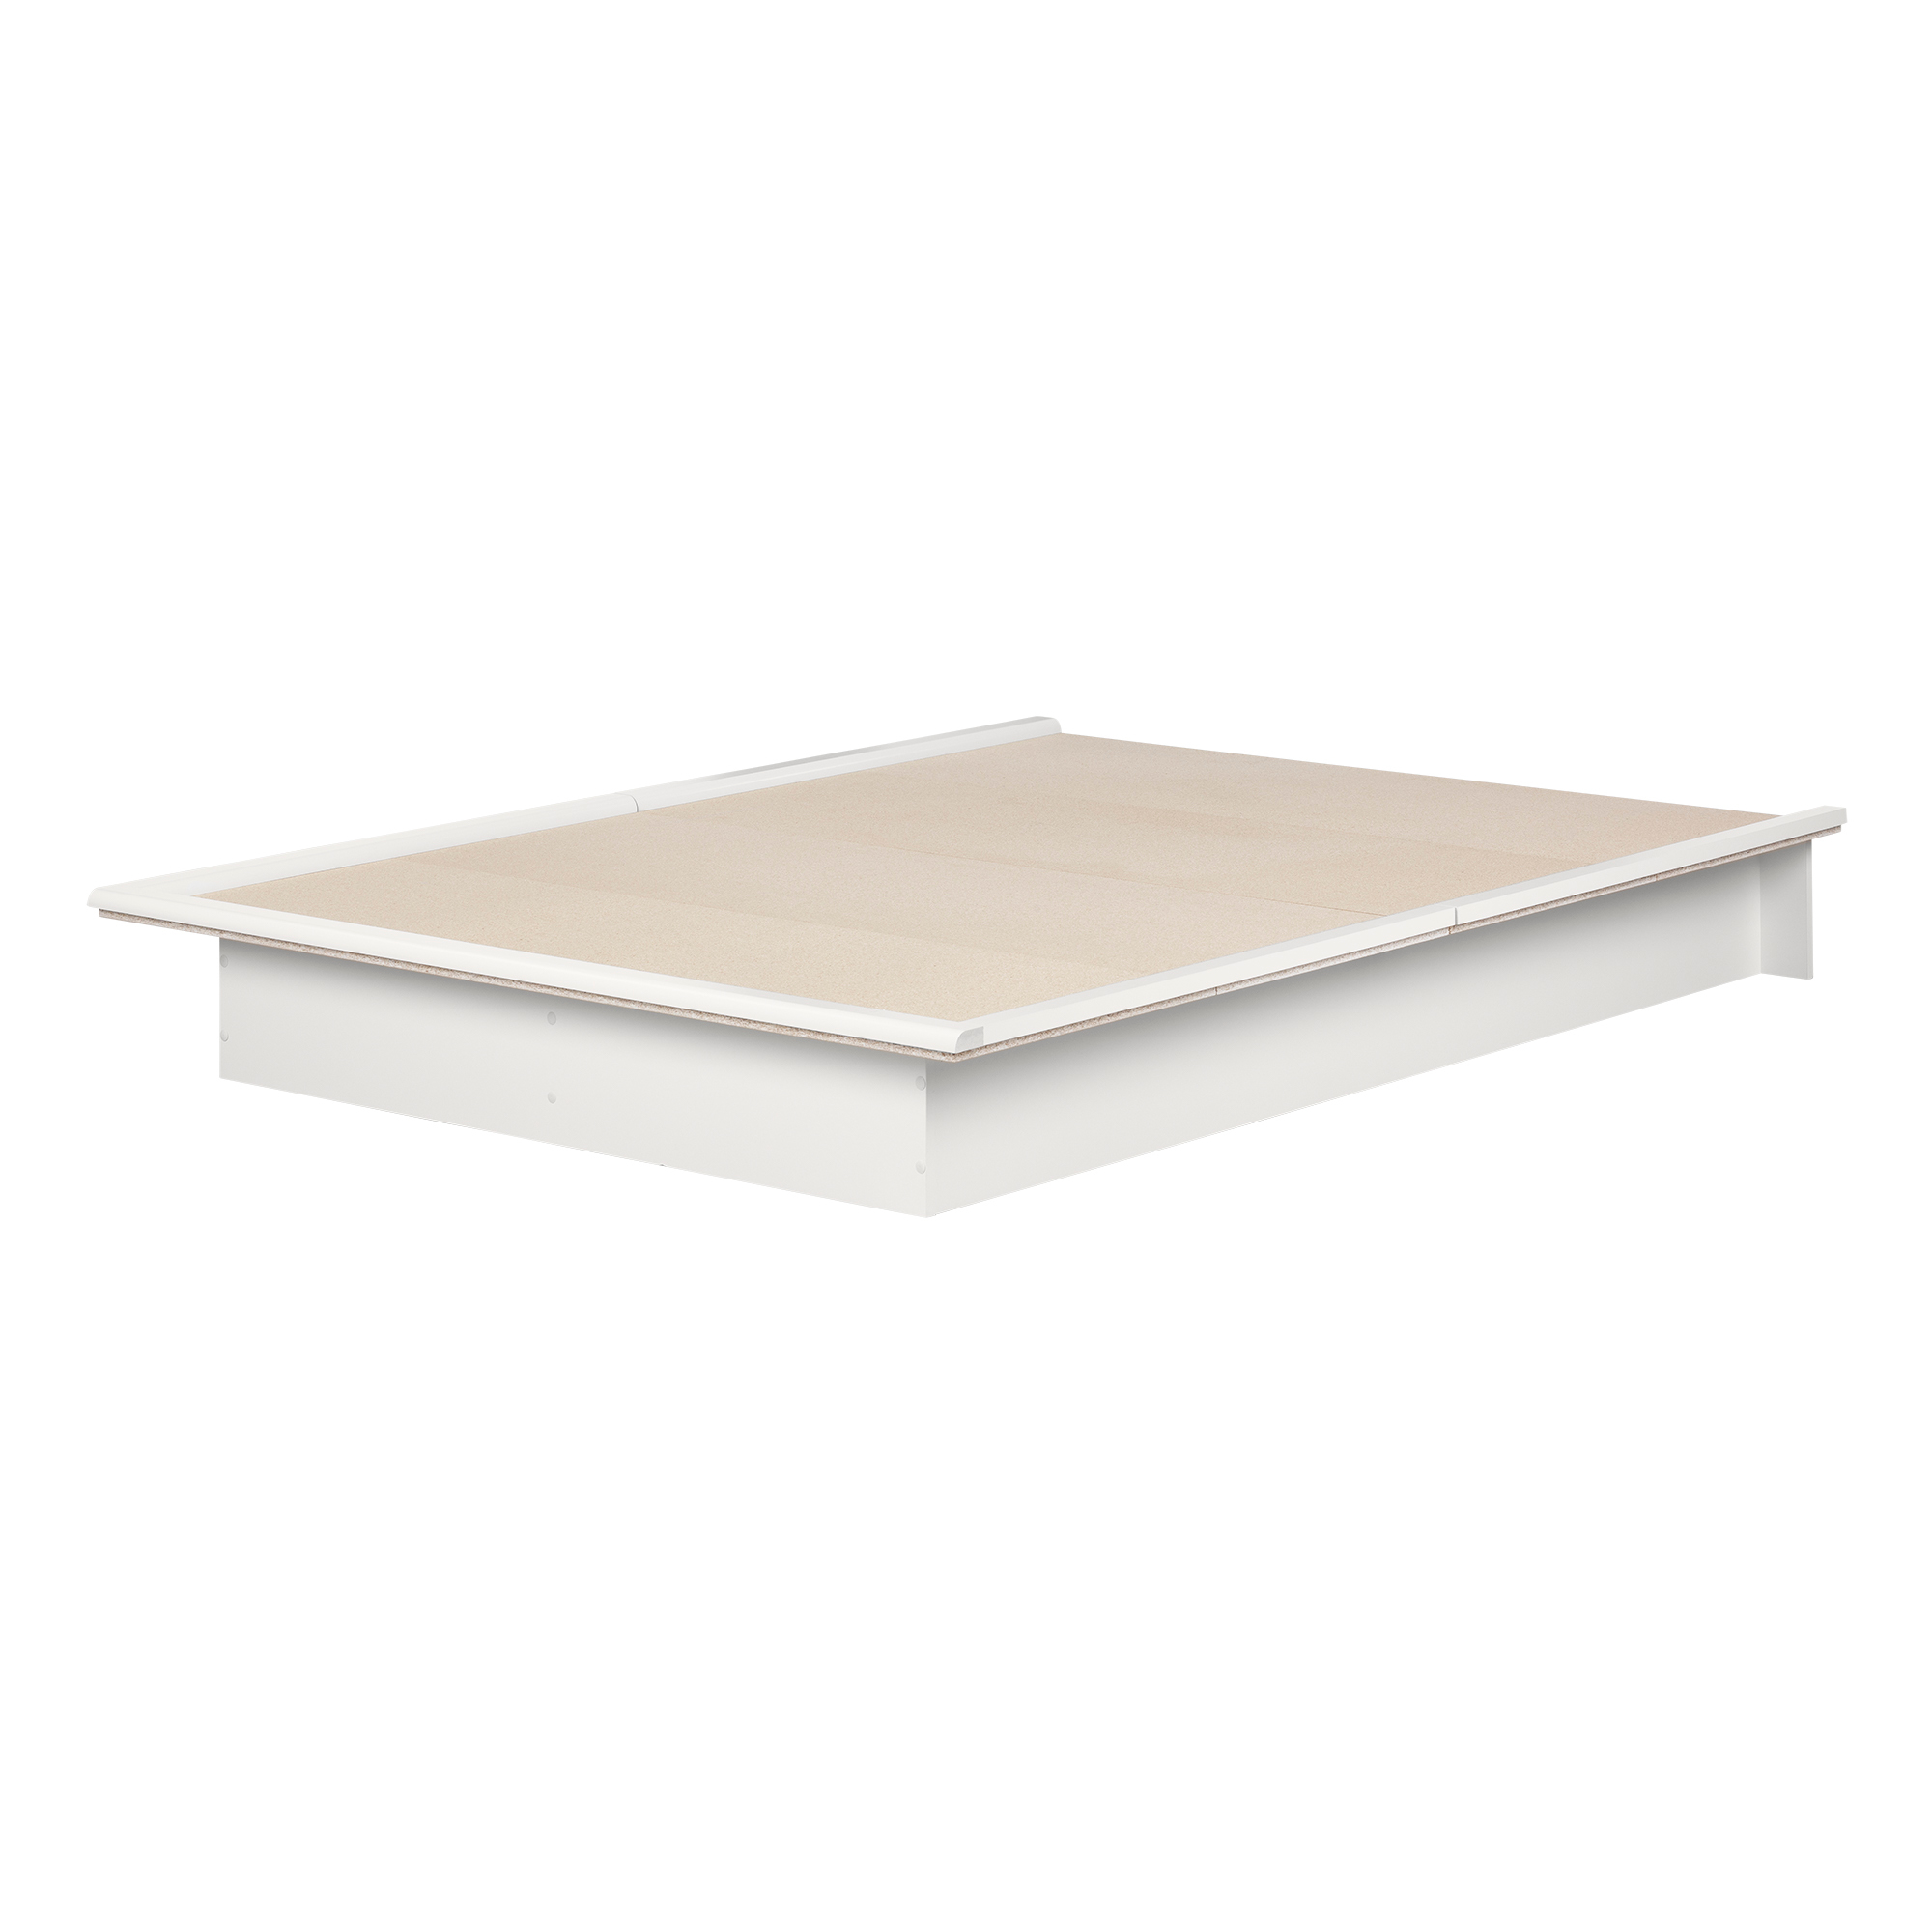 South Shore Basics Platform Bed with Molding, Pure White, Full - image 2 of 6